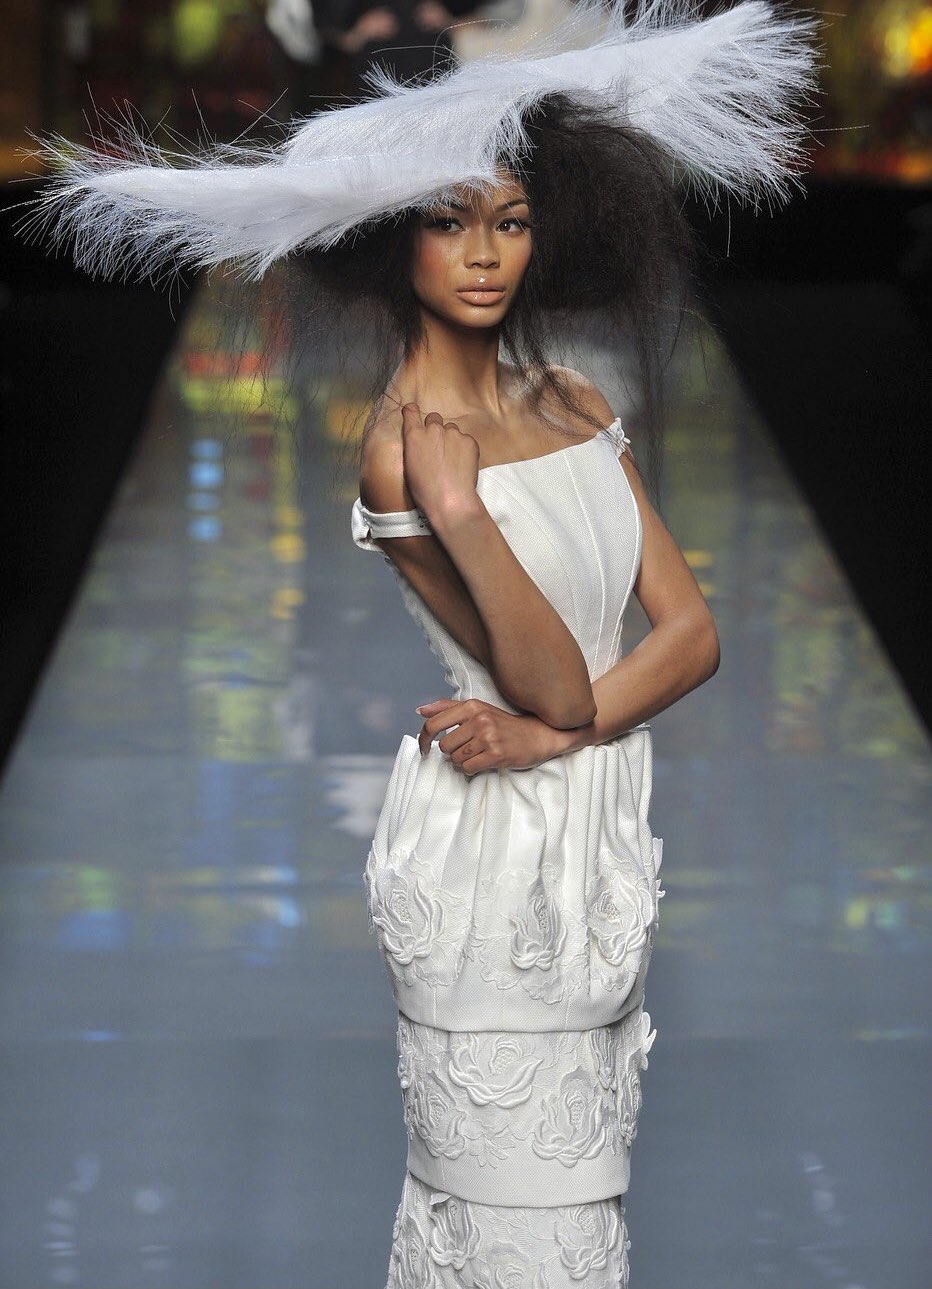 ❦ on X: chanel iman at christian dior s/s 2009 couture in the bridal rose  print dress paired with the feather hat  / X